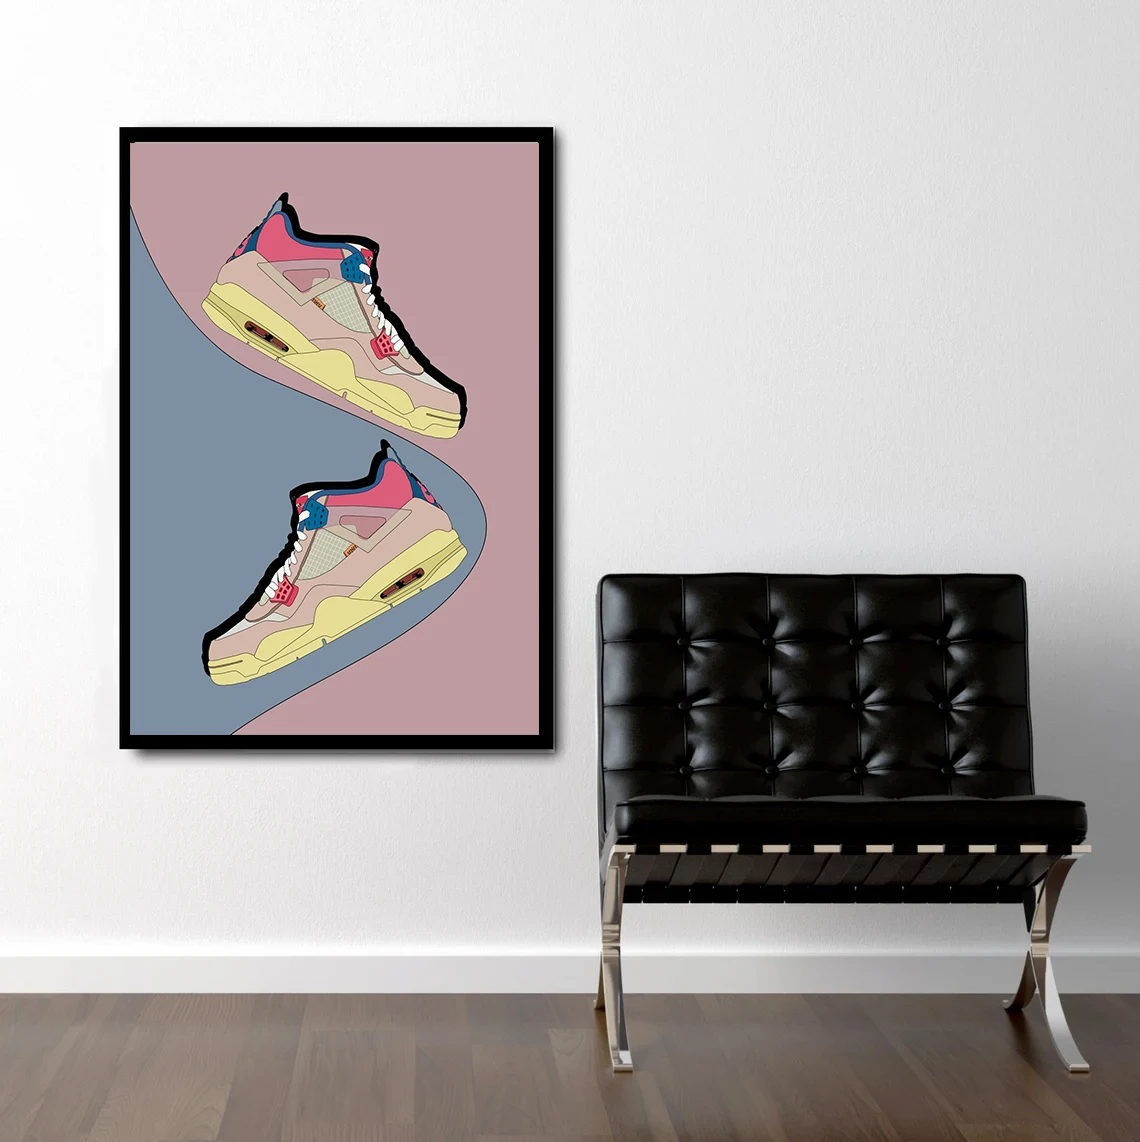 Sports Shoes Graffiti Wall Art Poster Canvas Painting Home Bedroom Decoration Picture Frameless